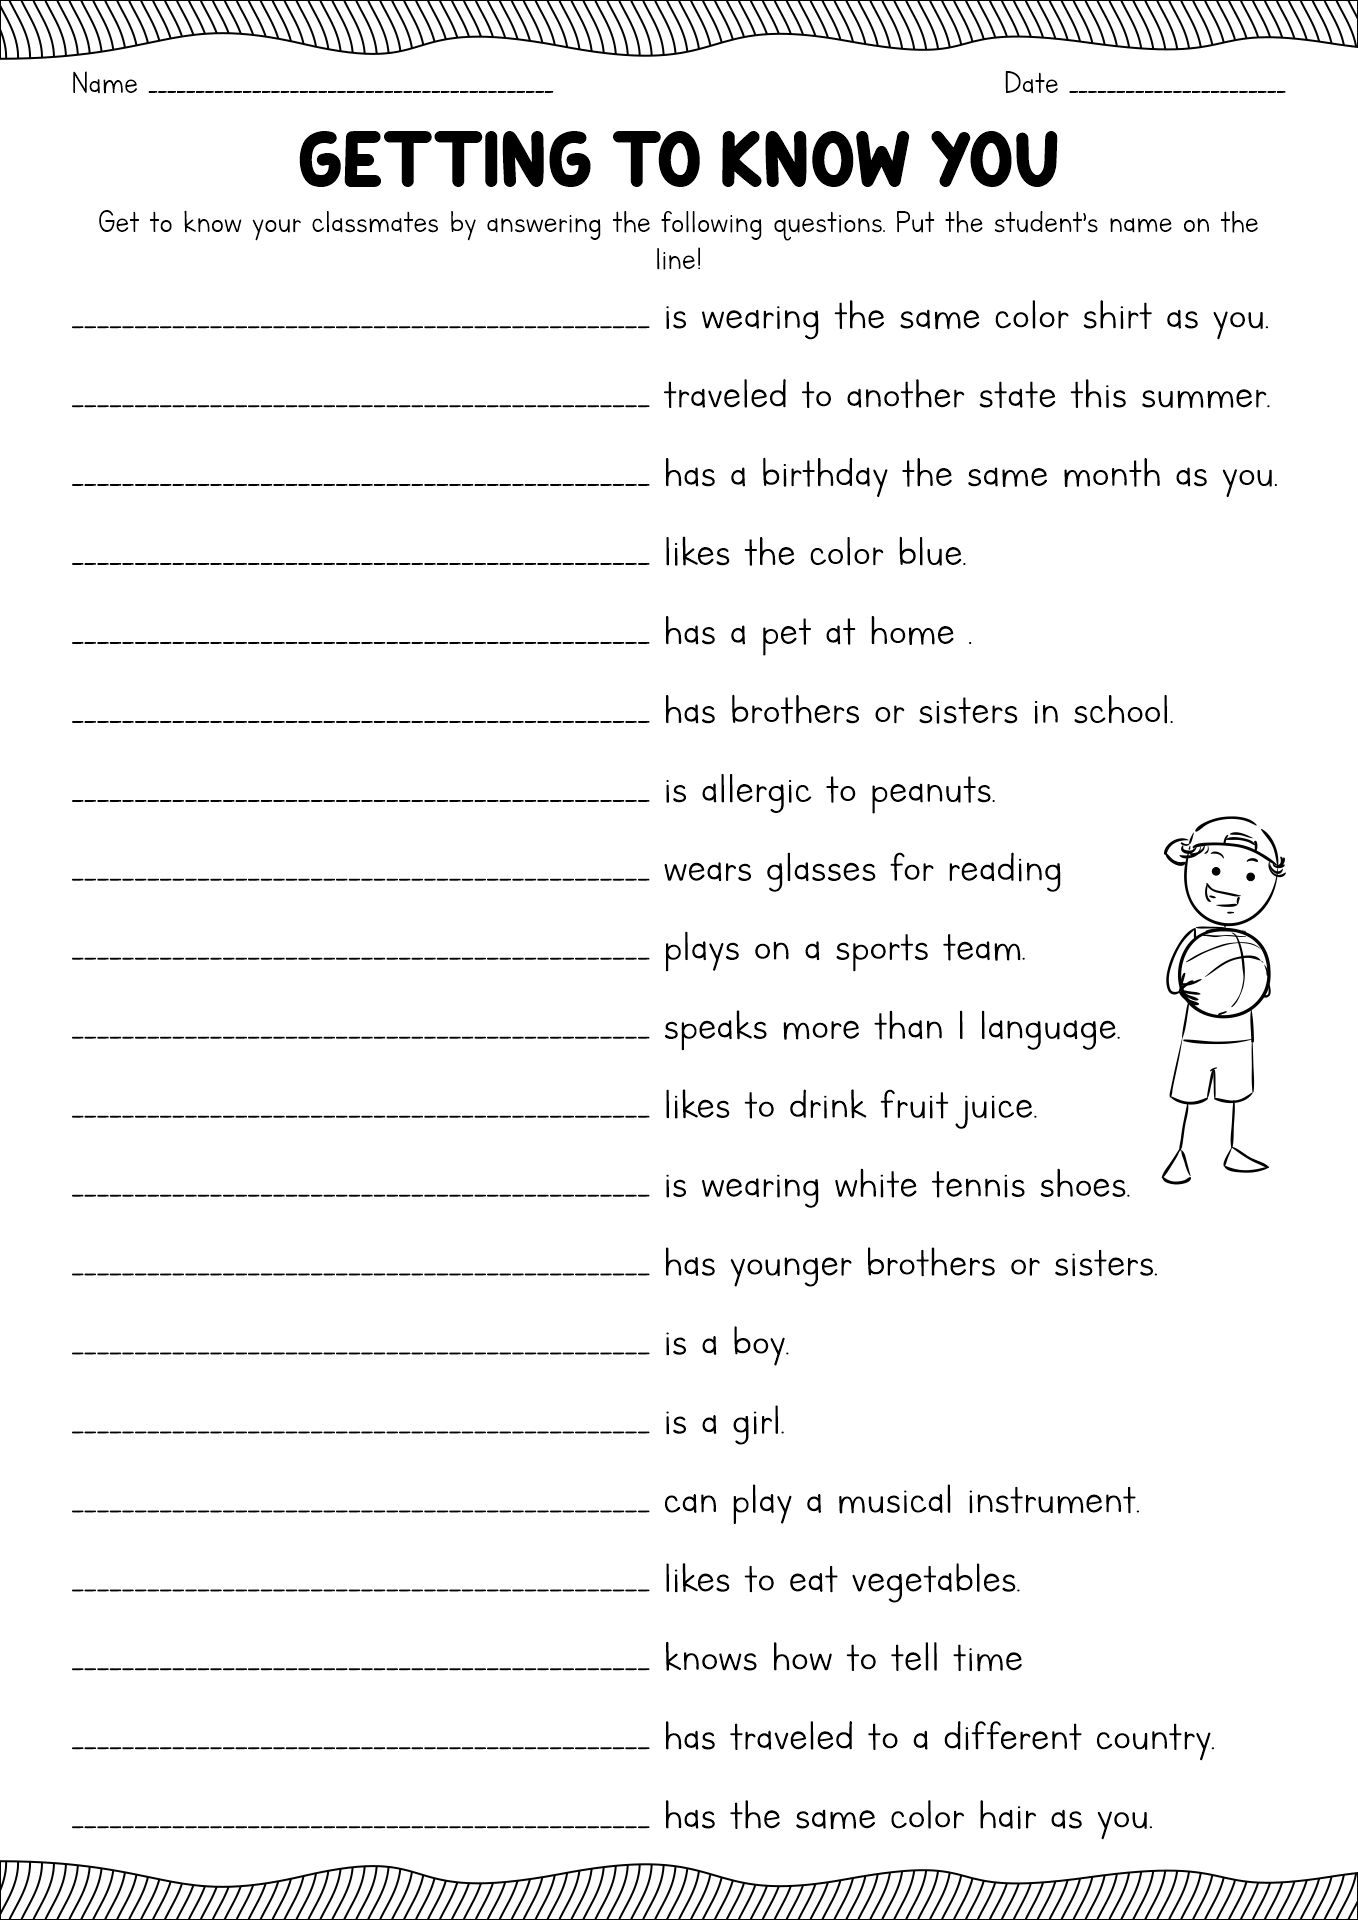 Printable Getting to Know You Worksheets Image